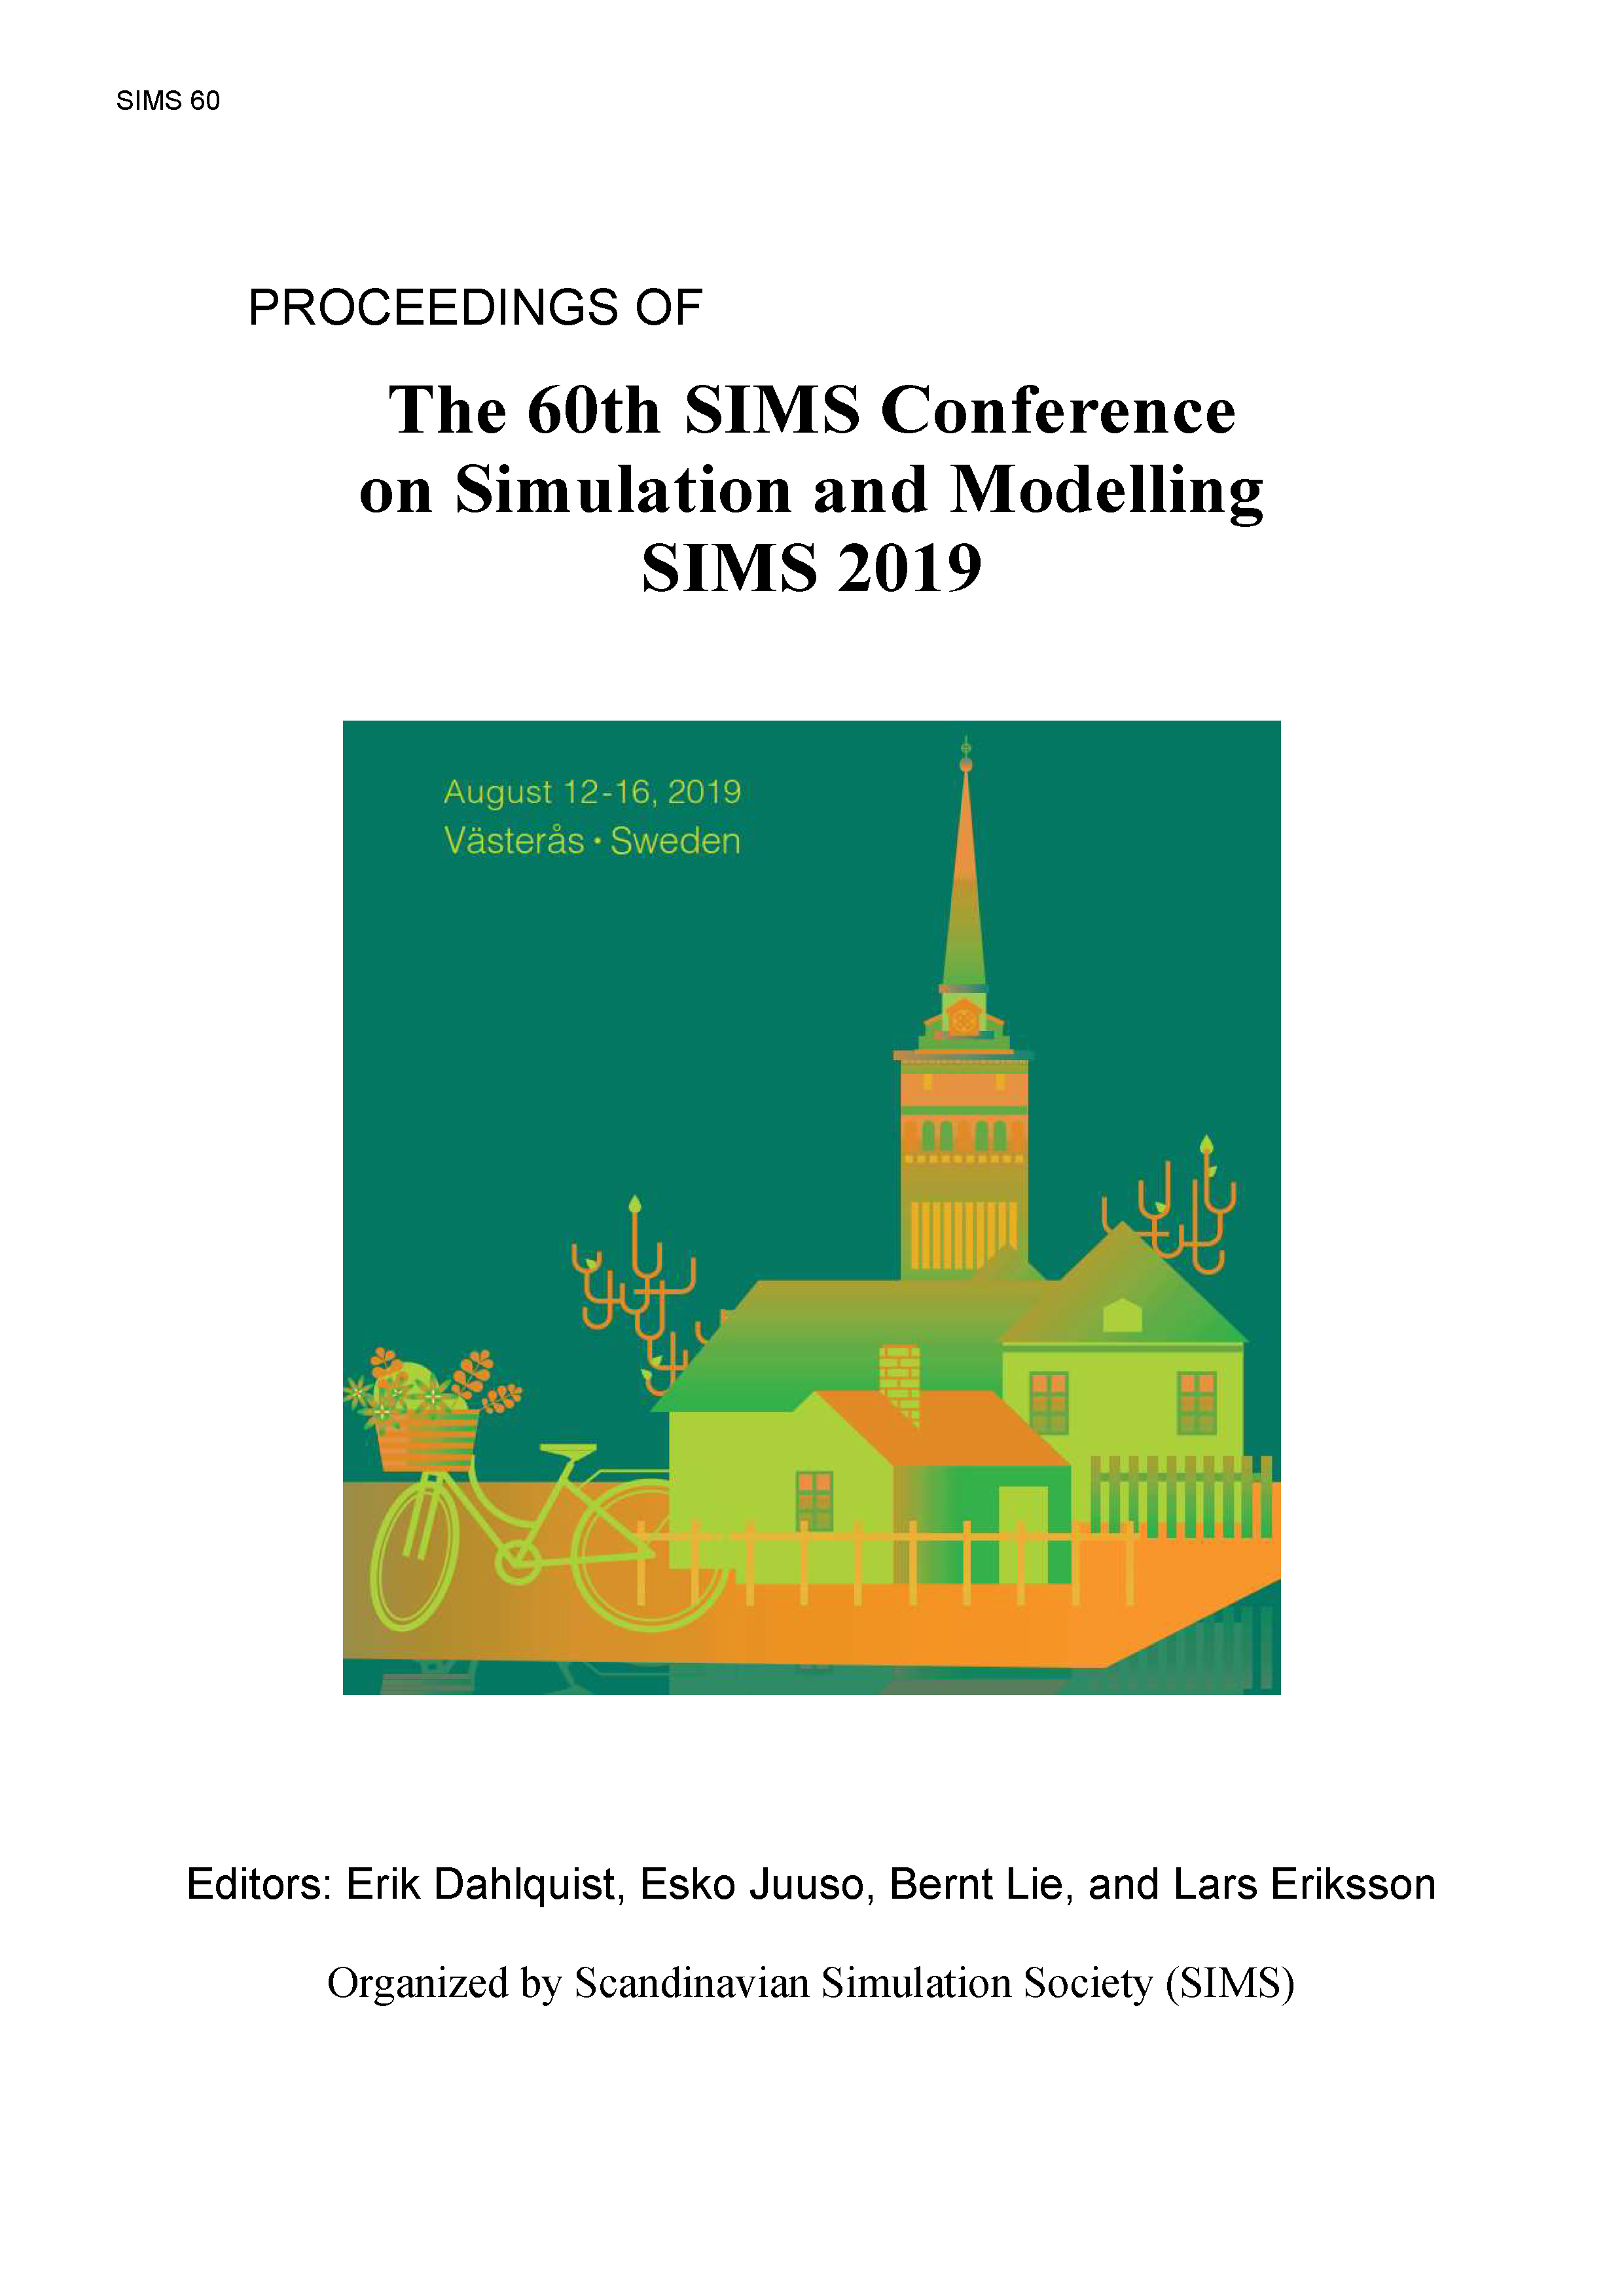 					View Proceedings of The 60th SIMS Conference on Simulation and Modelling SIMS 2019, August 12-16, Västerås, Sweden
				